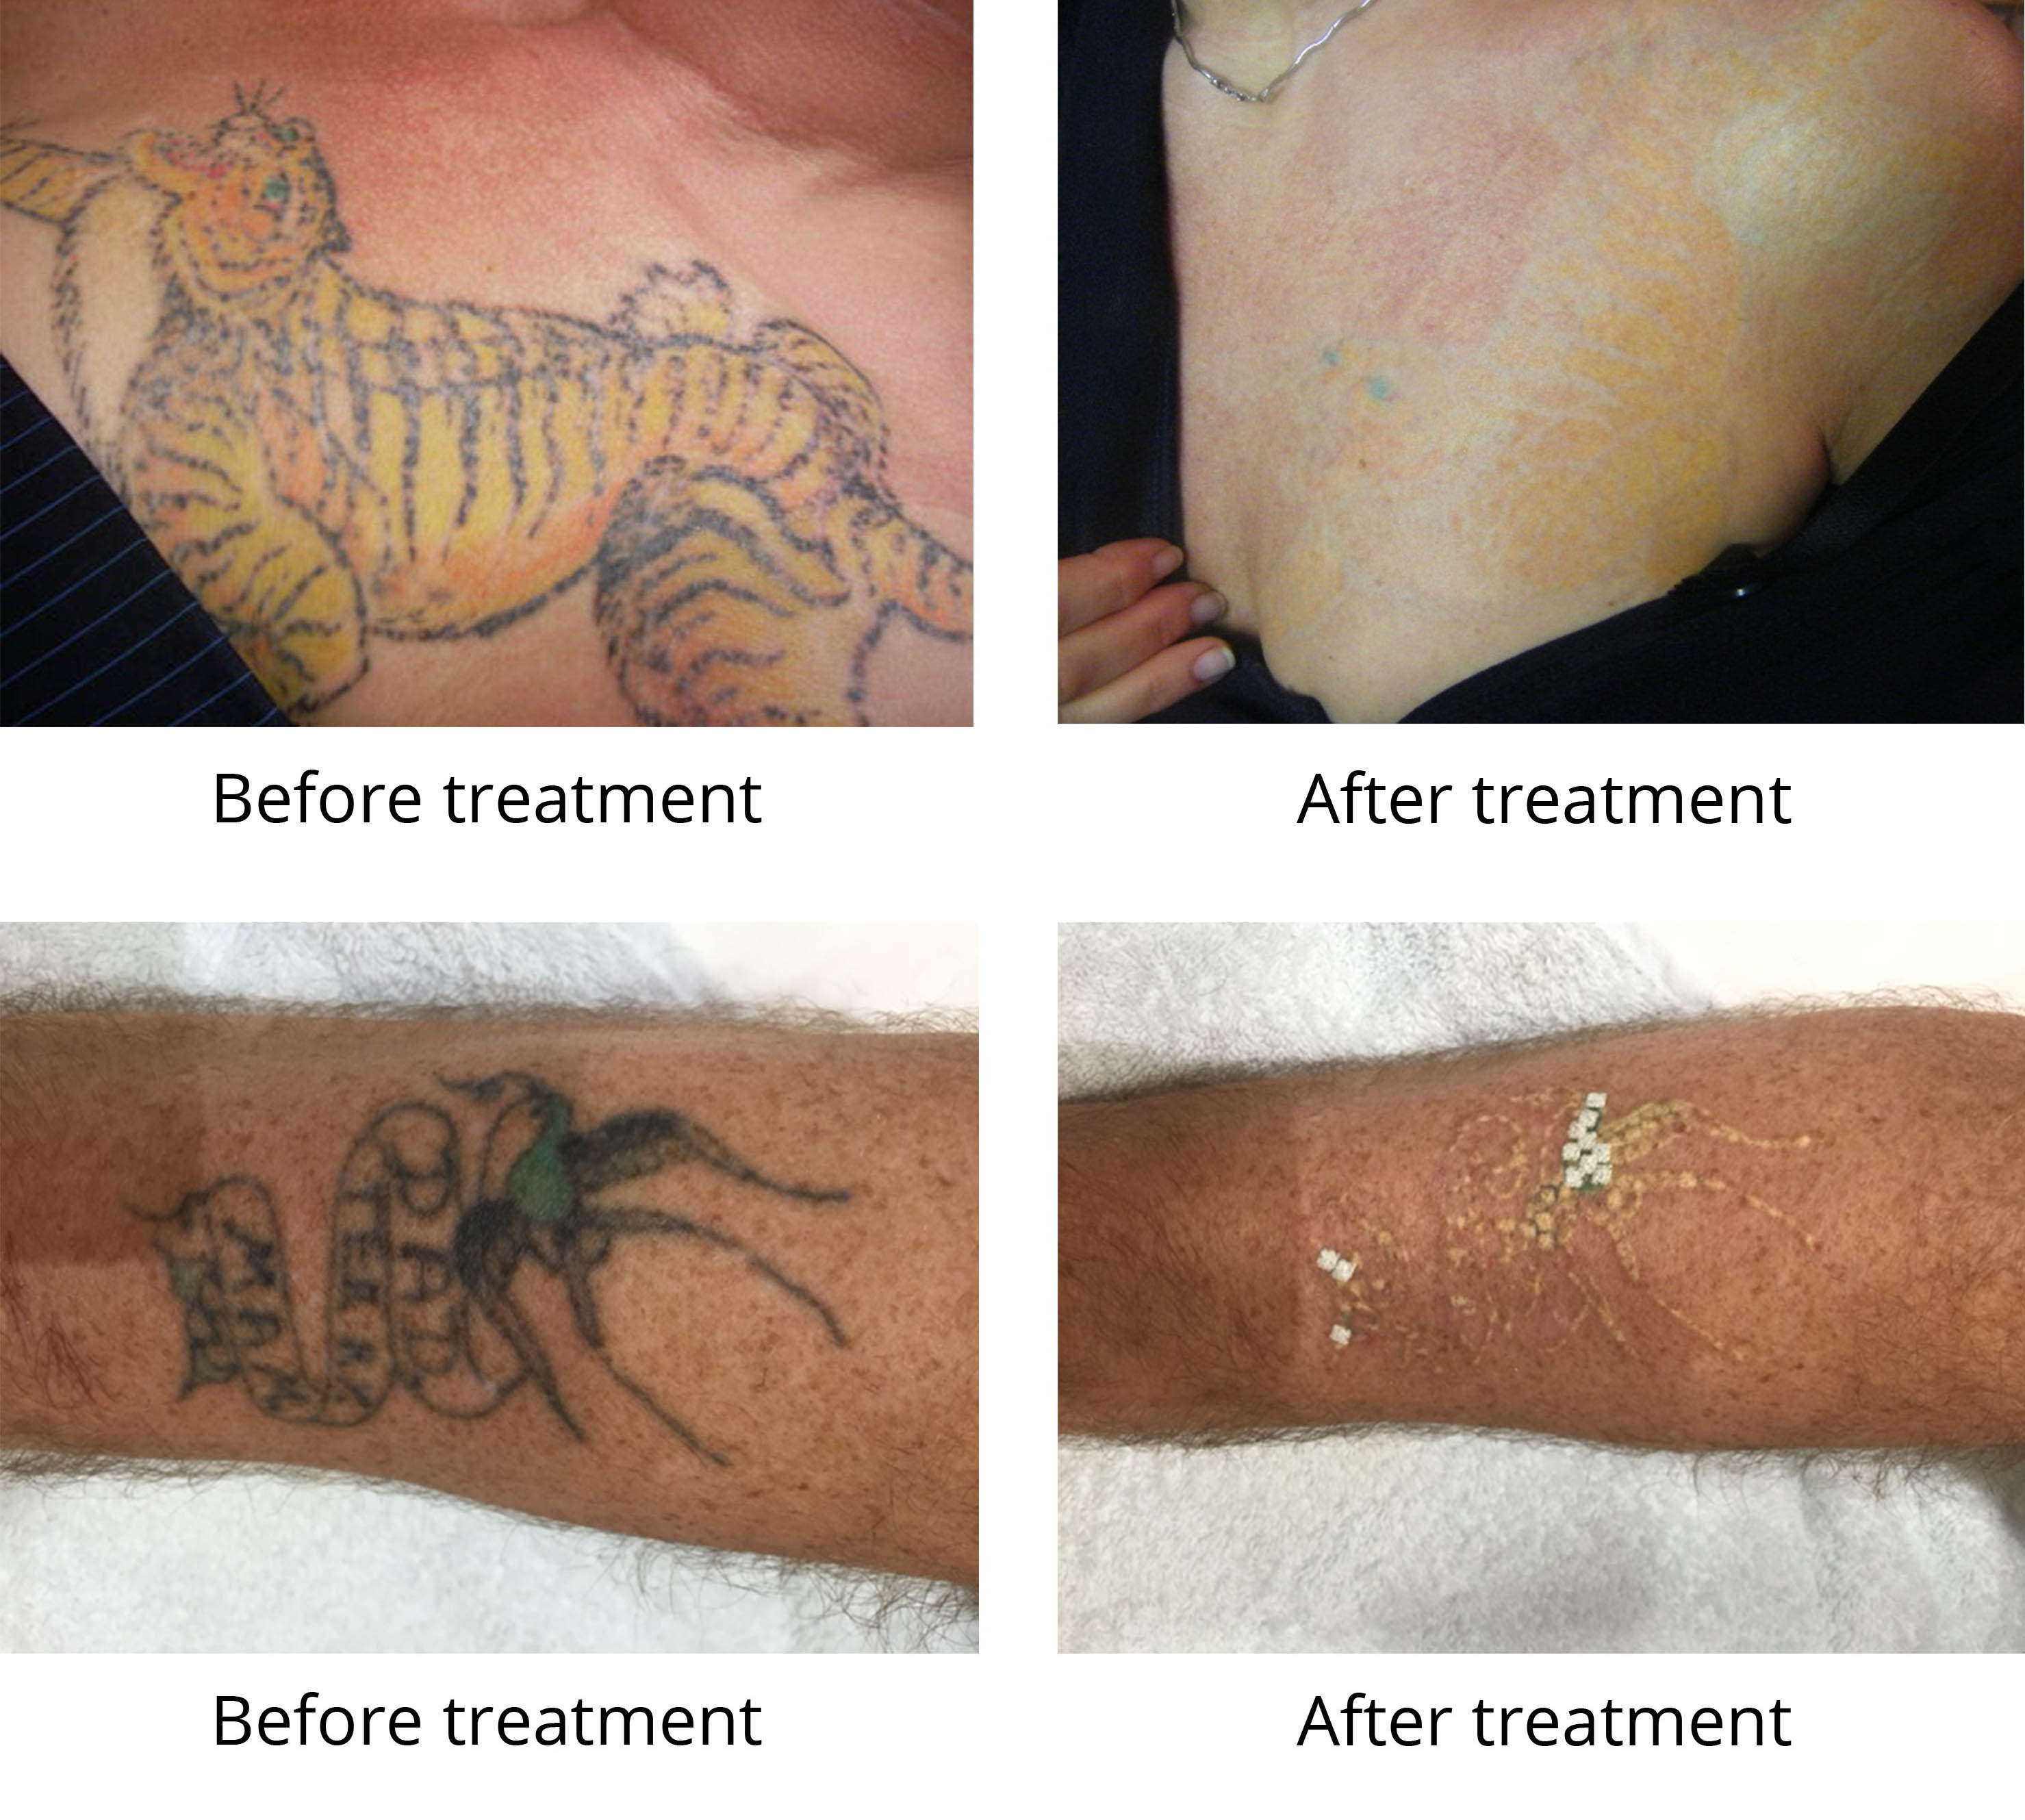 HandPost Aesthetic Clinic - Tattoo Removal & Pigmentation